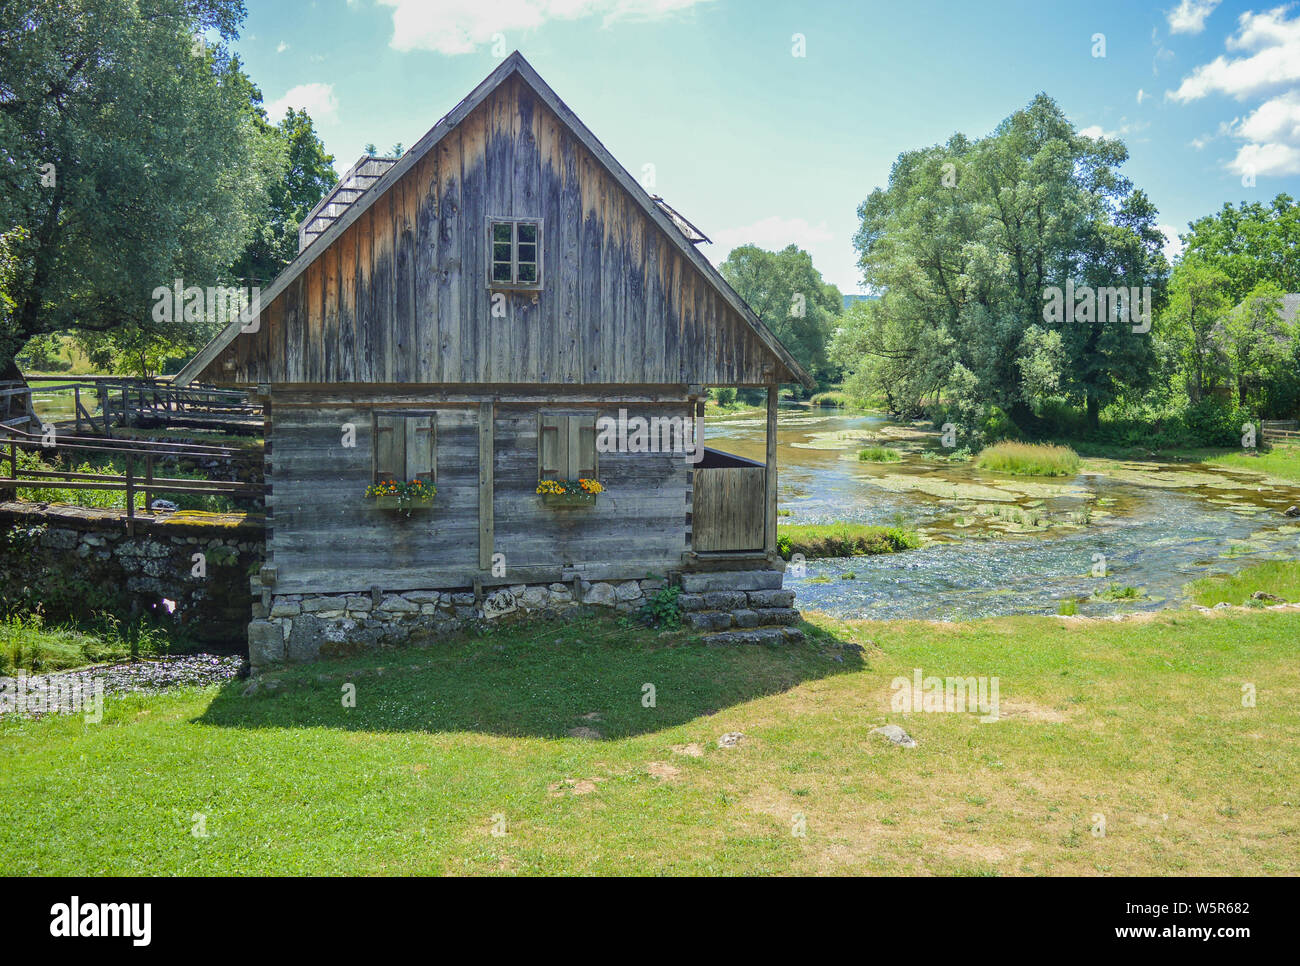 Wooden water mill on river Gacka springs, Majerovo vrilo Stock Photo